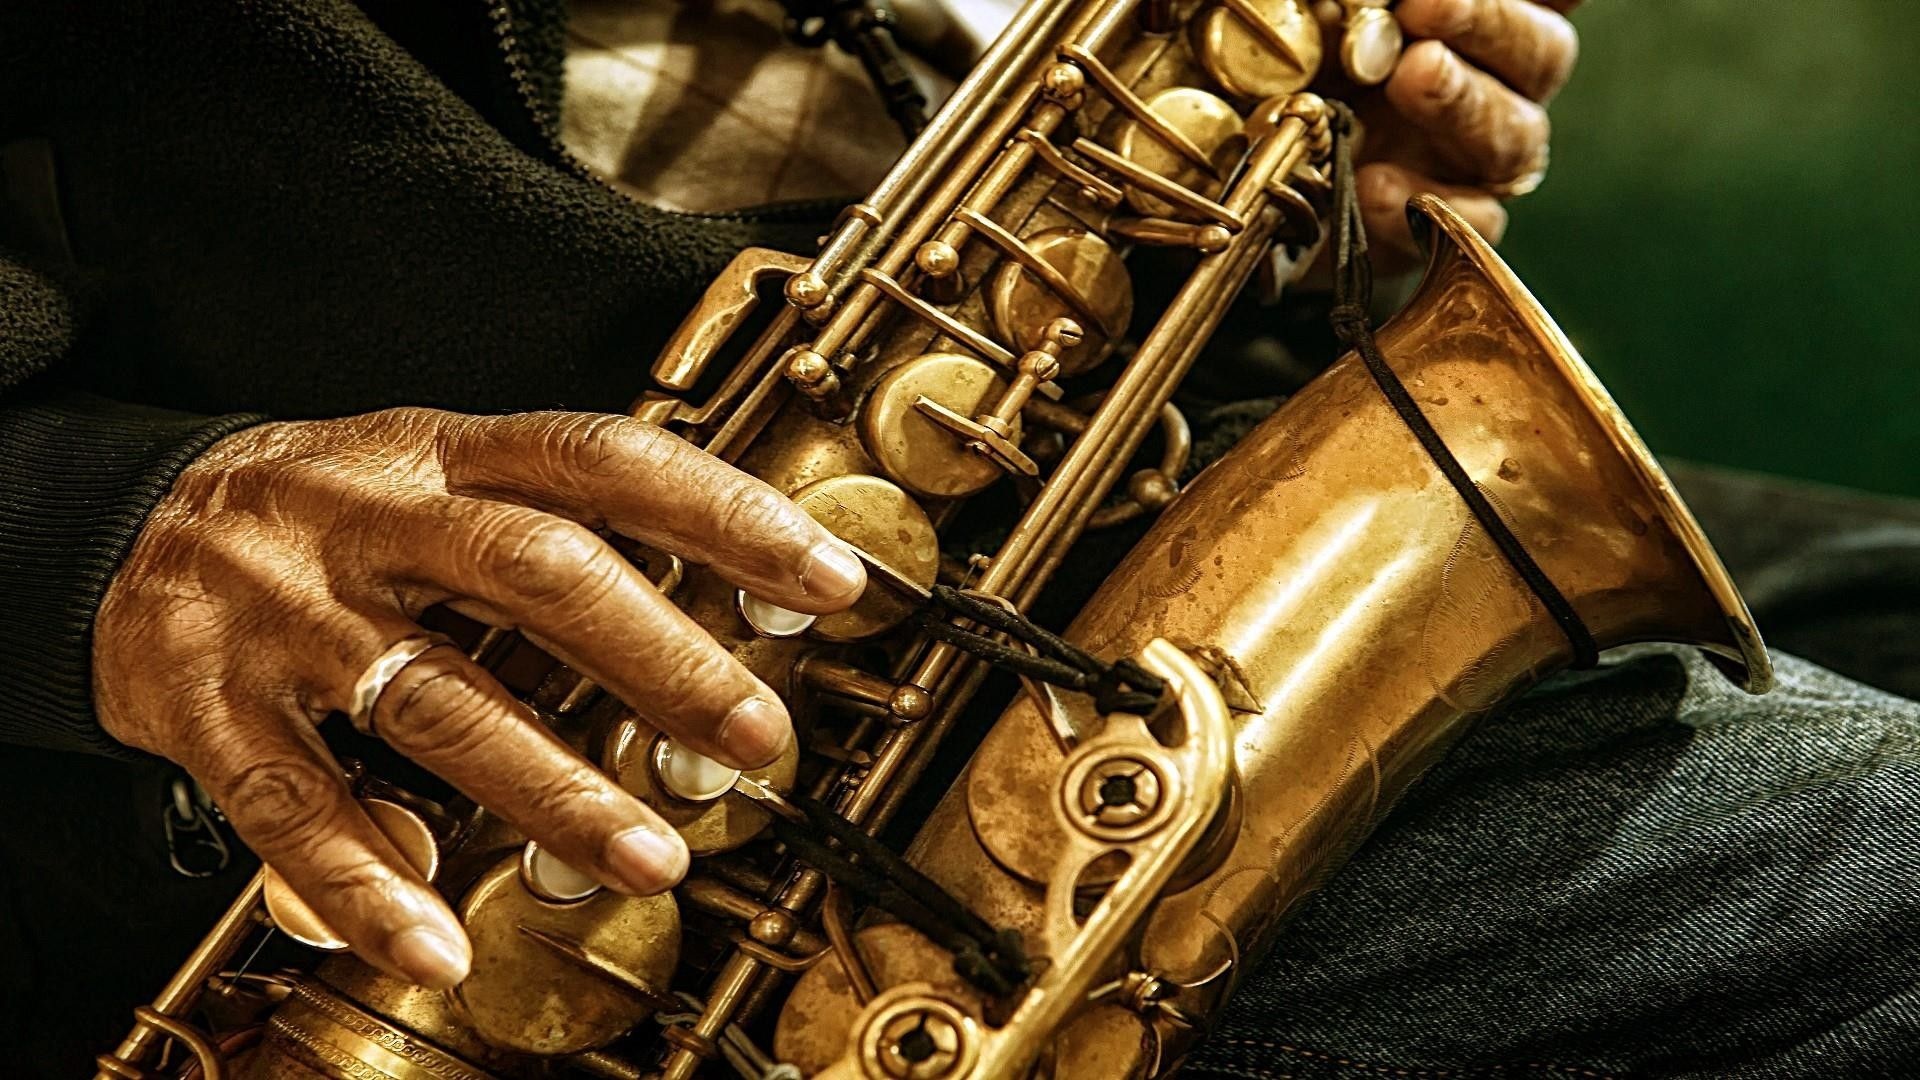 Saxophone: Jazz music, A musical wind instrument in the shape of a curved metal tube with keys. 1920x1080 Full HD Background.